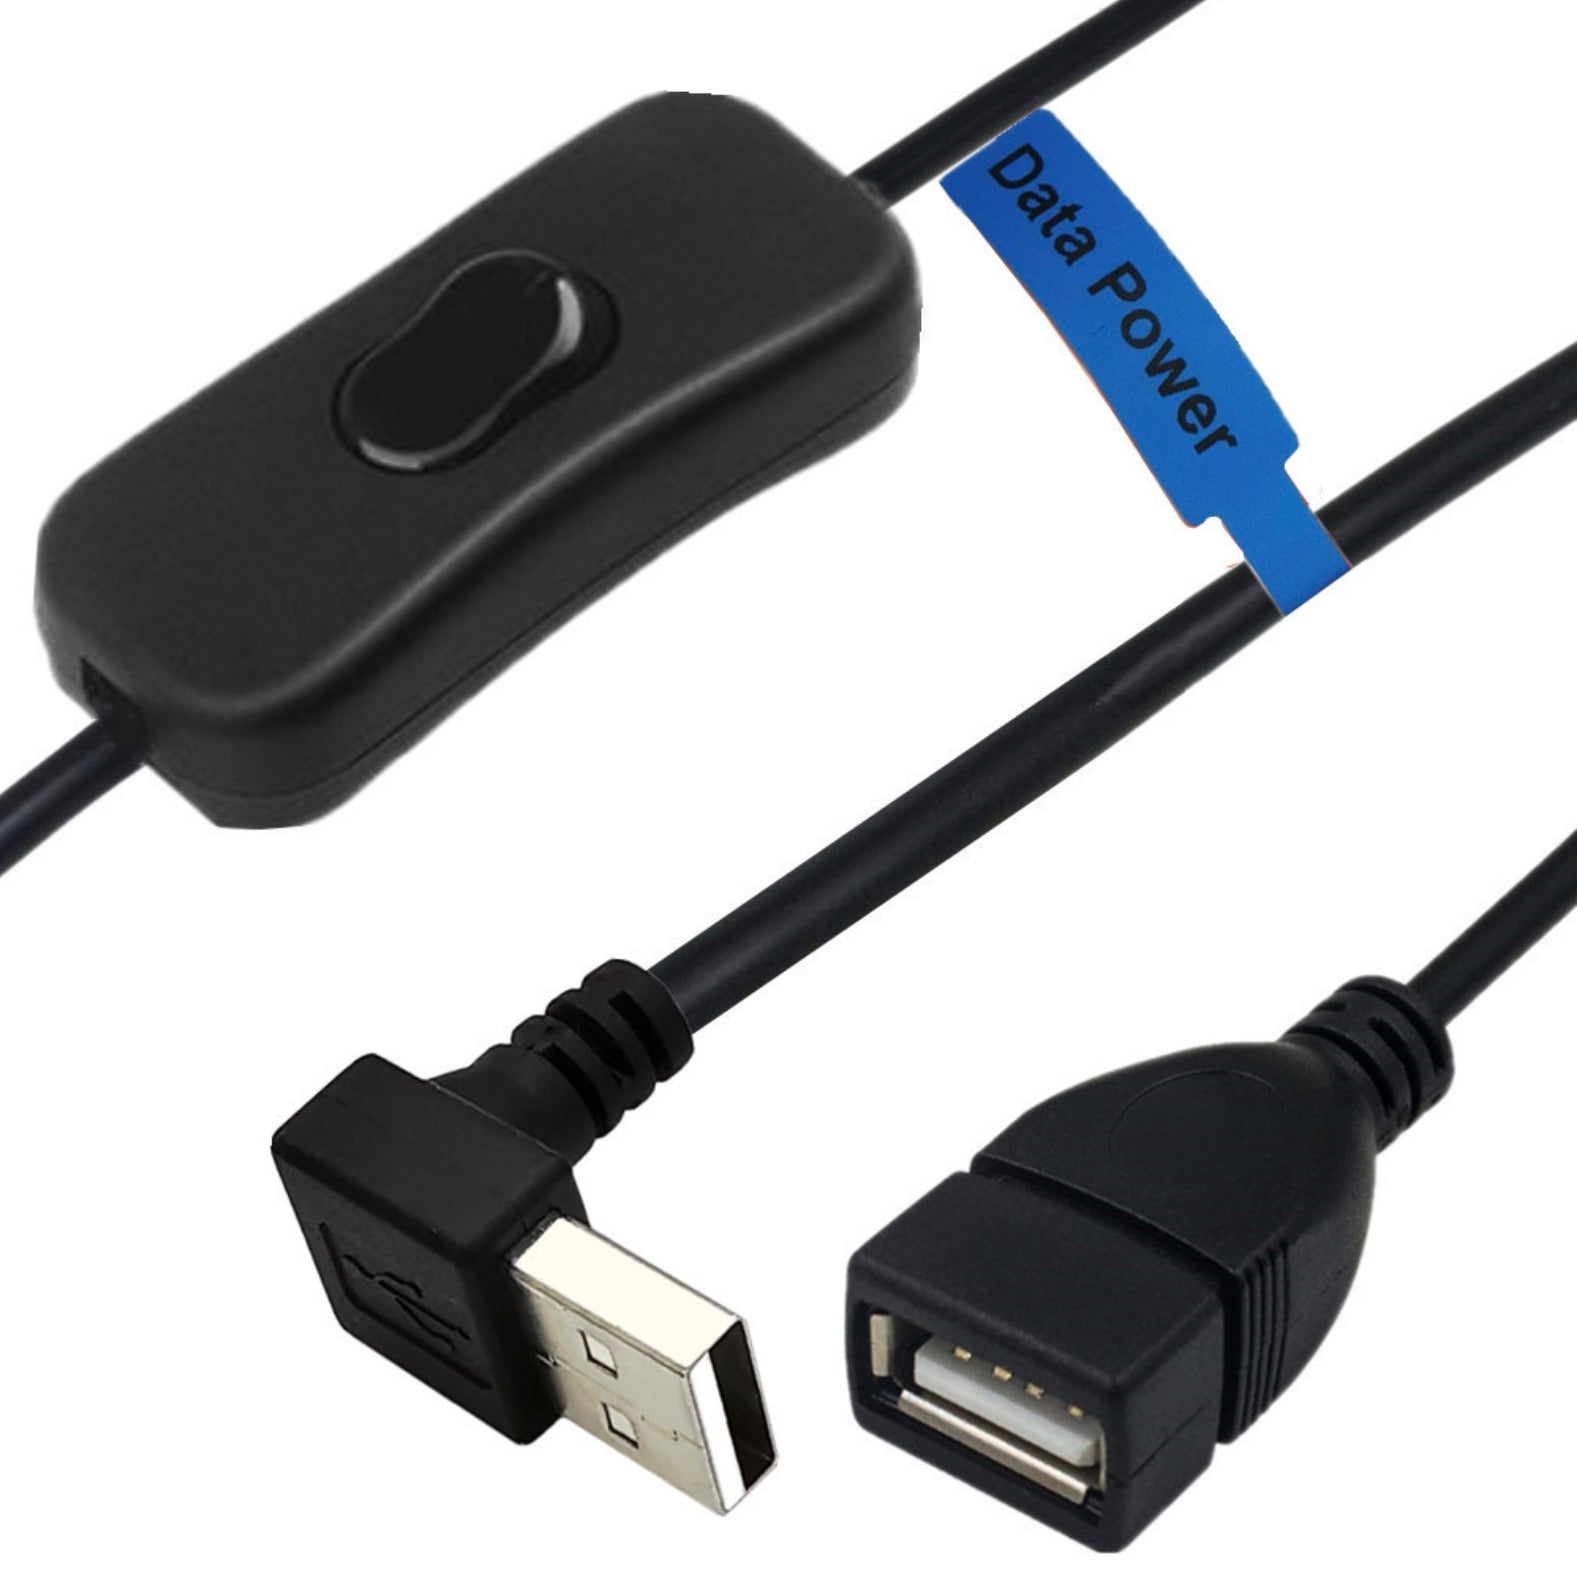 USB 2.0 A Male to Female Data Charging Extension Cable with On/Off Switch